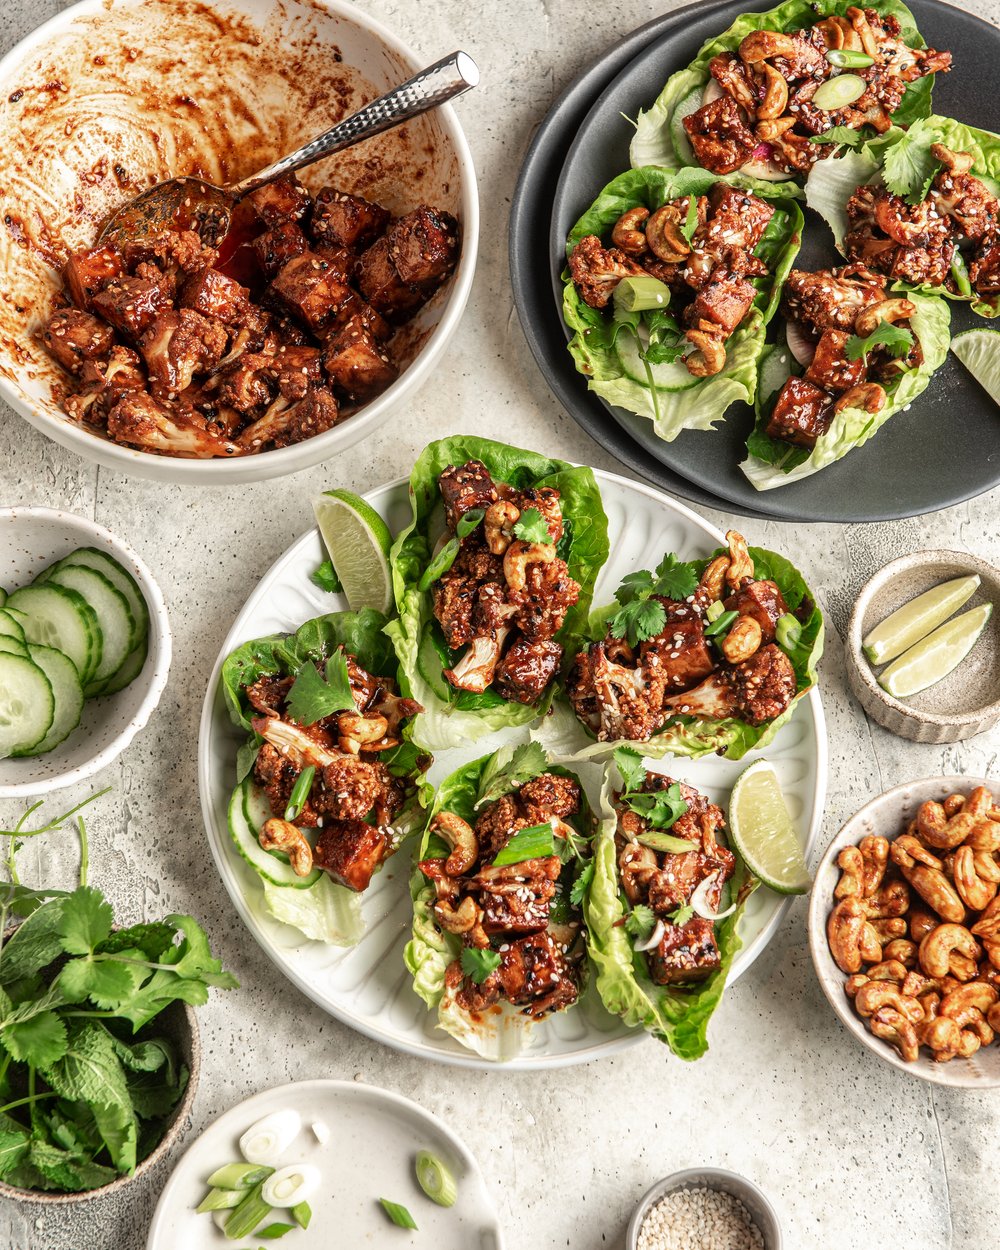 Deconstructed BBQ Tofu Cauliflower Lettuce Wraps. Several bowls of ingredients such as lettuce, bbq cauliflower and tofu, cucumber and cashews.